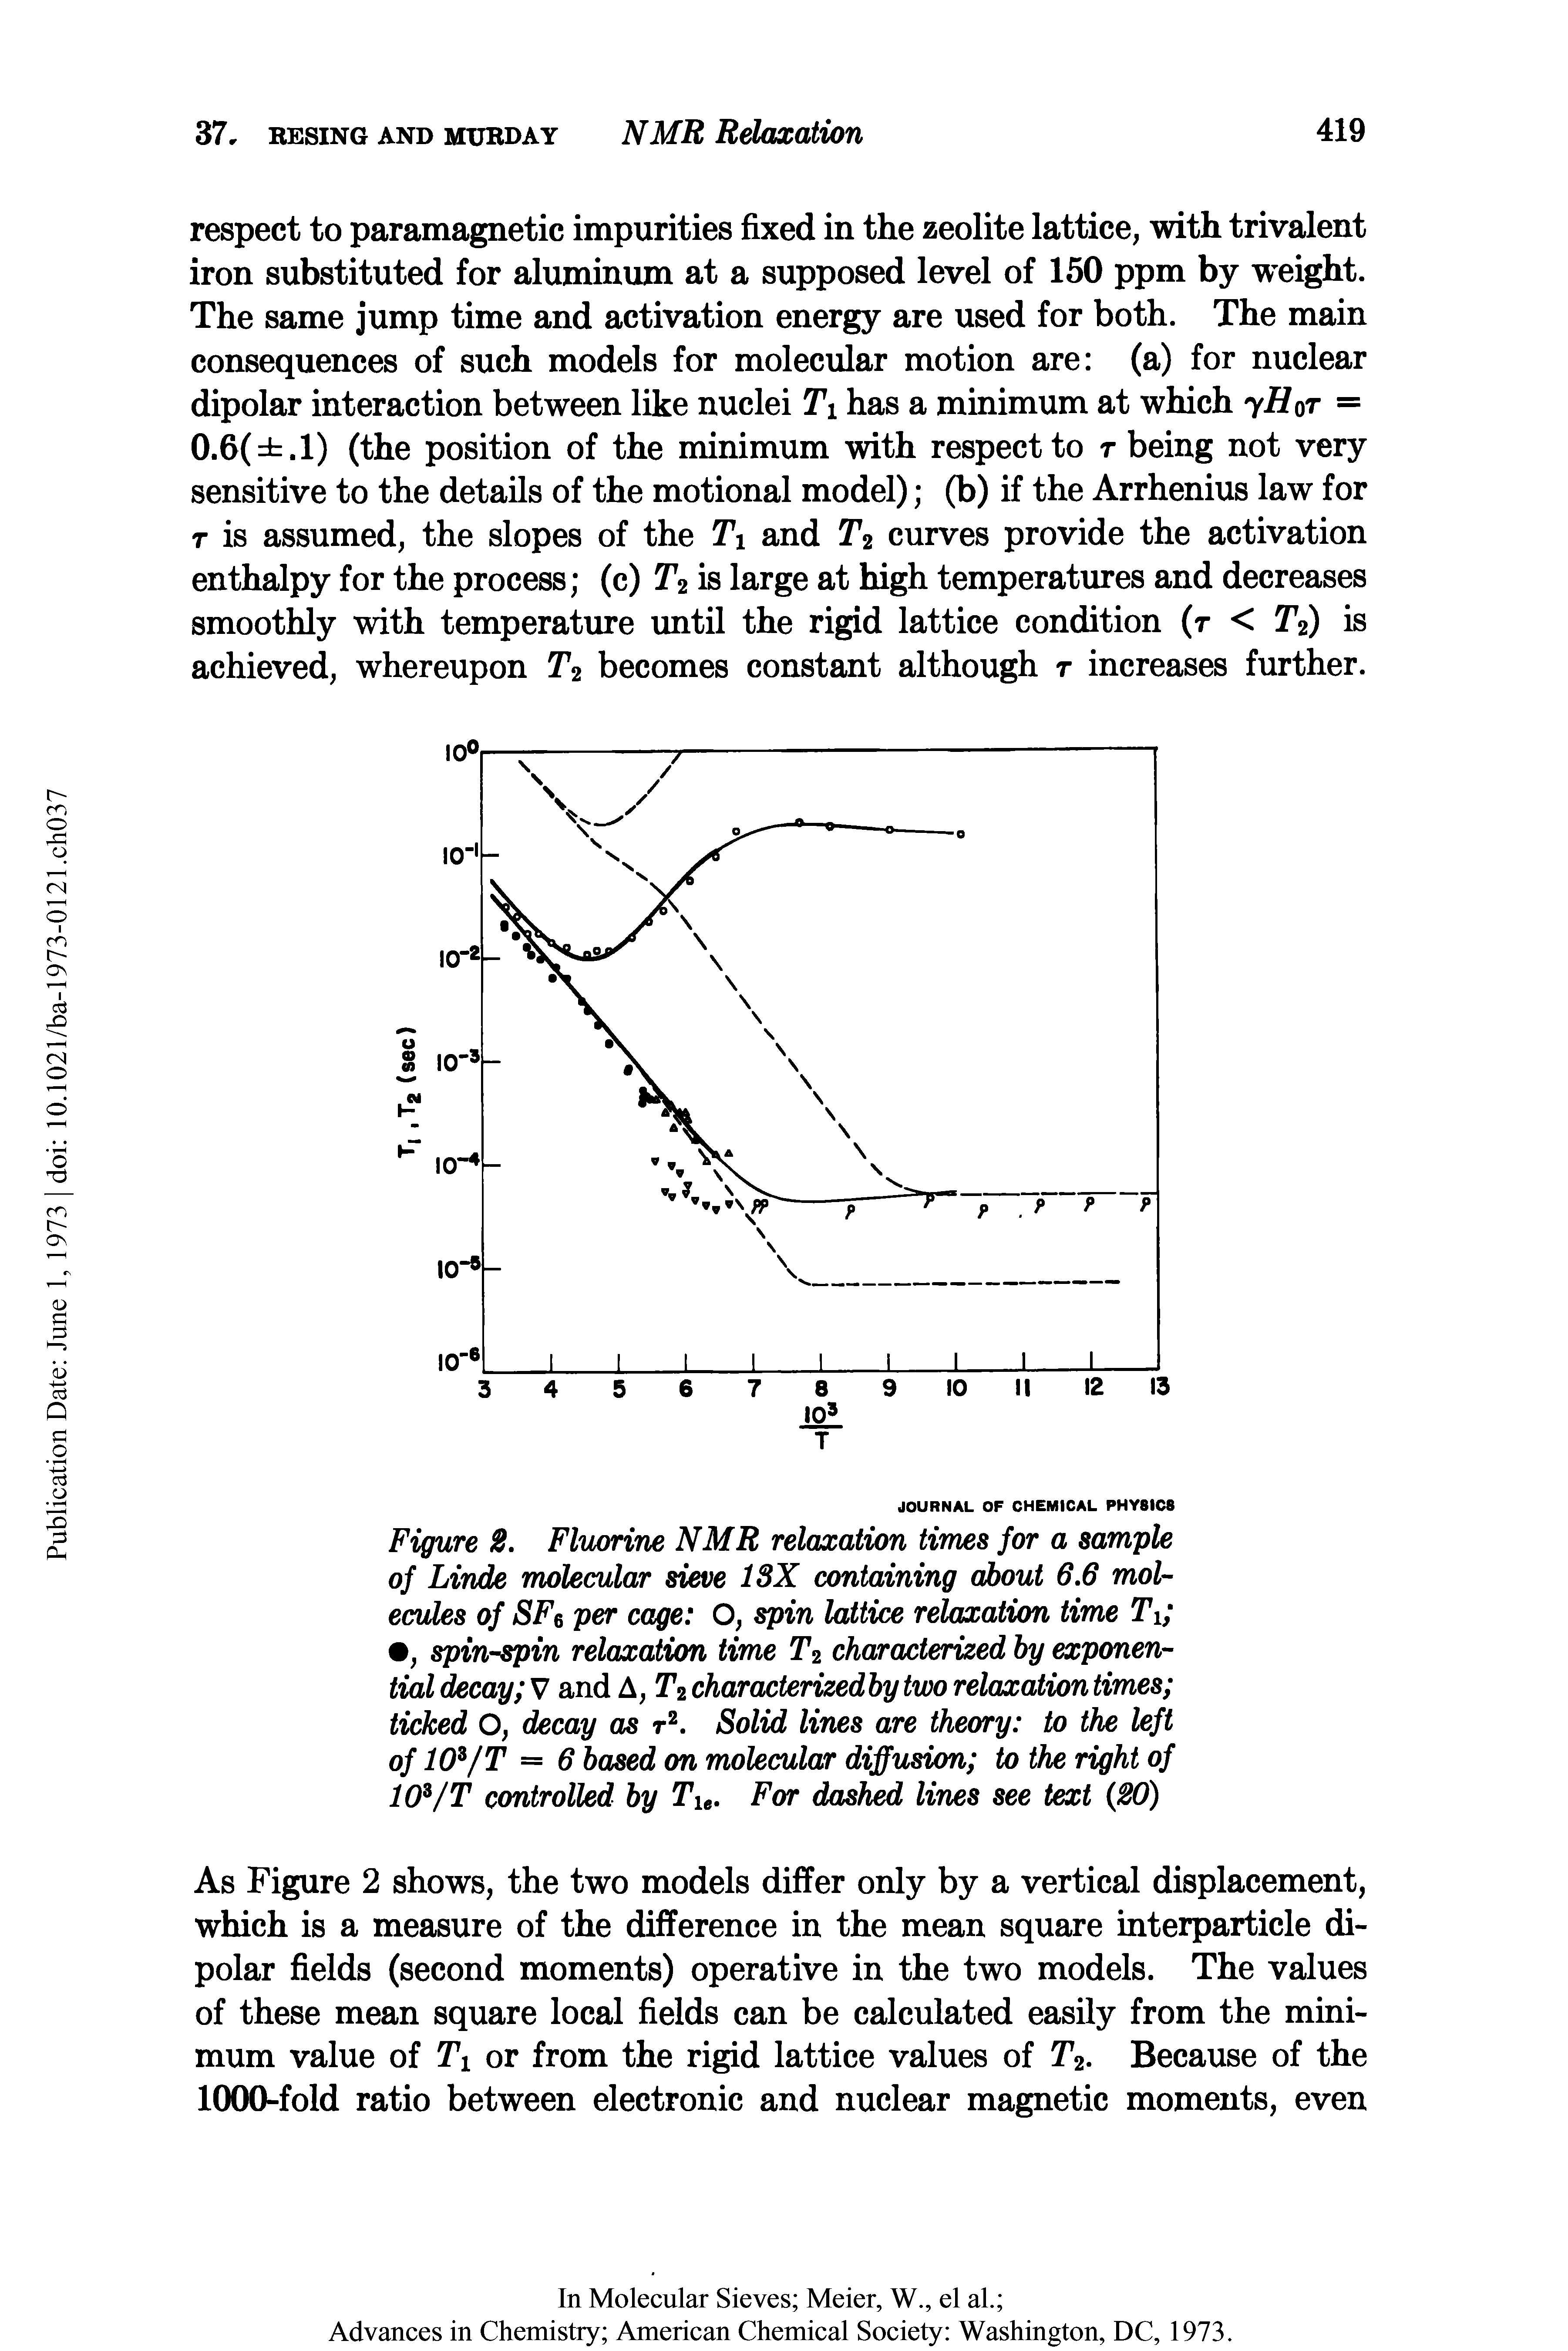 Figure 2. Fluorine NMR relaxation times for a sample of Linde molecular sieve 13X containing about 6.6 molecules of SFg per cage O, spin lattice relaxation time , spin-spin relaxation time T2 characterized by exponential decay V and A, T2 characterizedby two relaxation times ticked O, decay as r2. Solid lines are theory to the left of 10Z/T = 6 based on molecular diffusion to the right of 10Z/T controlled by Tu. For dashed lines see text (20)...